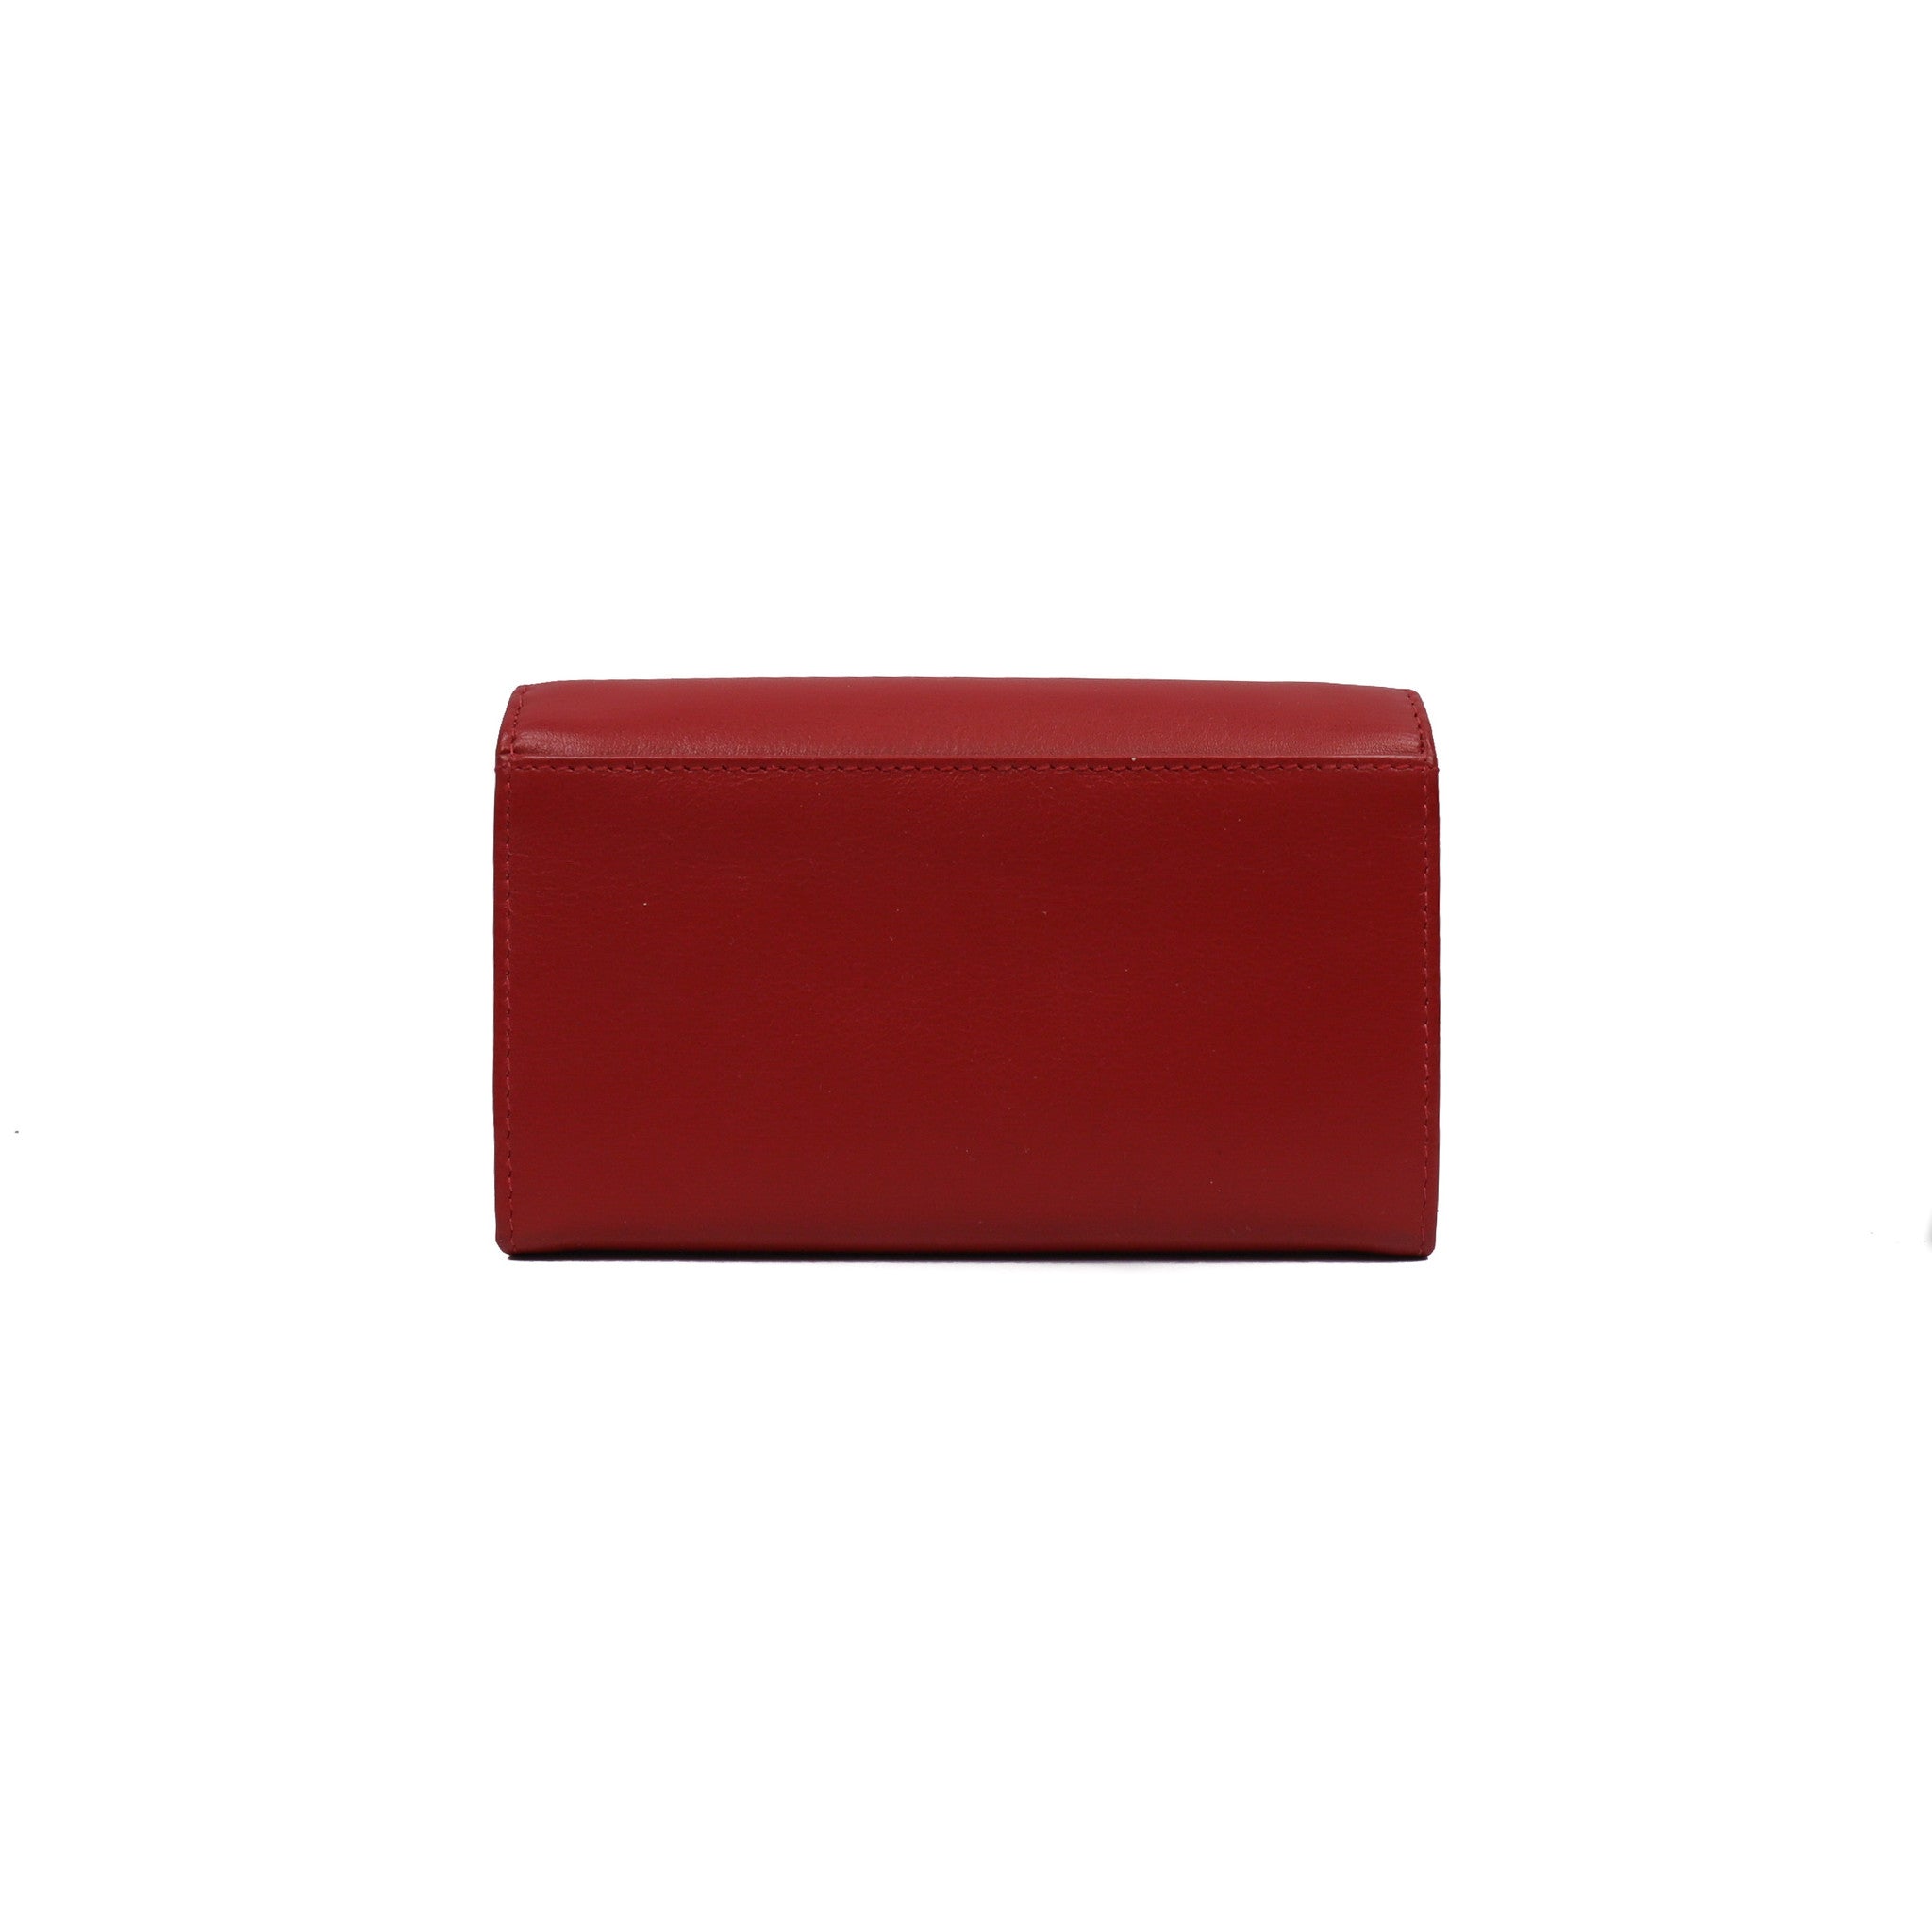 Wrap wallet 'Lizzy' red - FR 9925